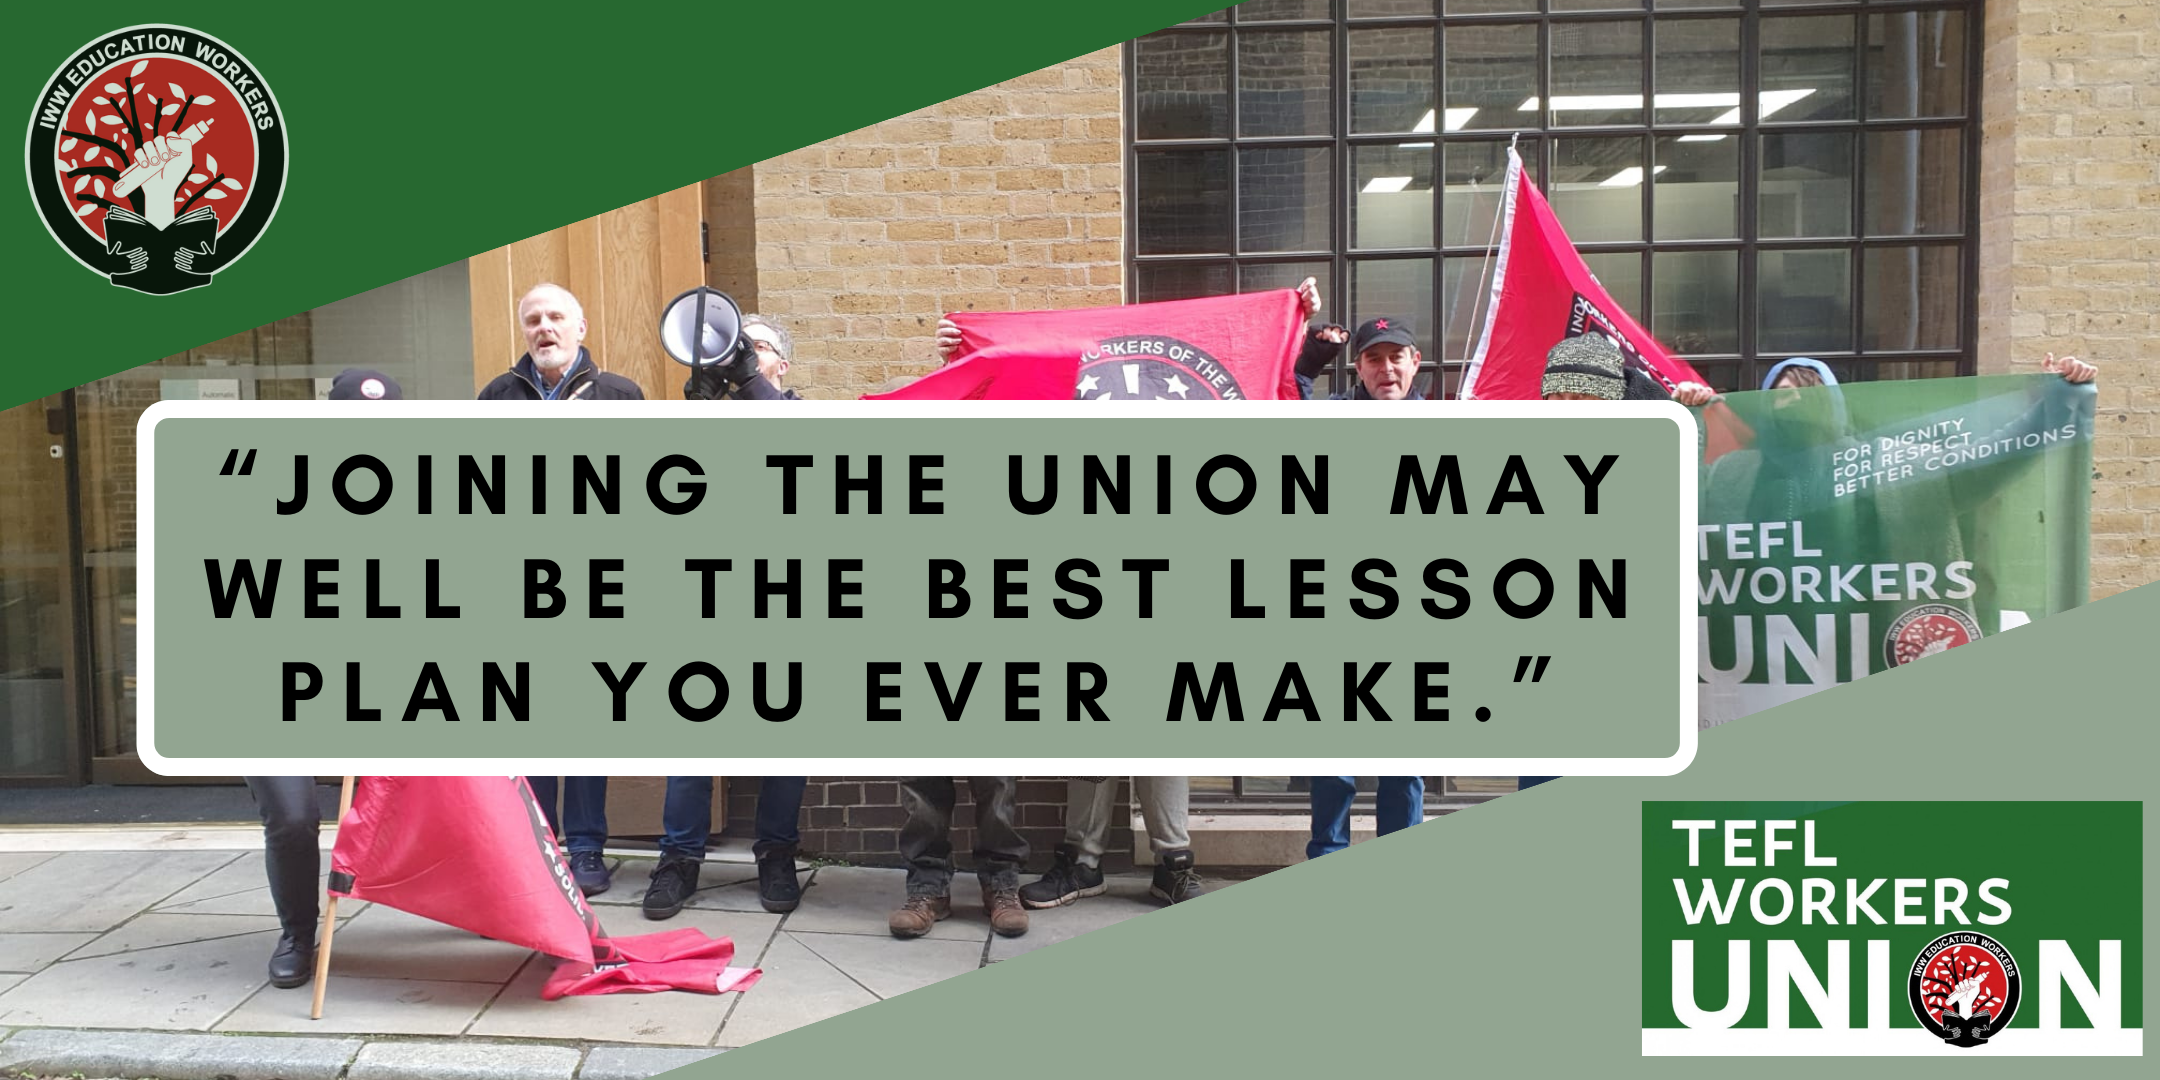 Image reader: "Joining the union may well be the best lesson plan you ever make."